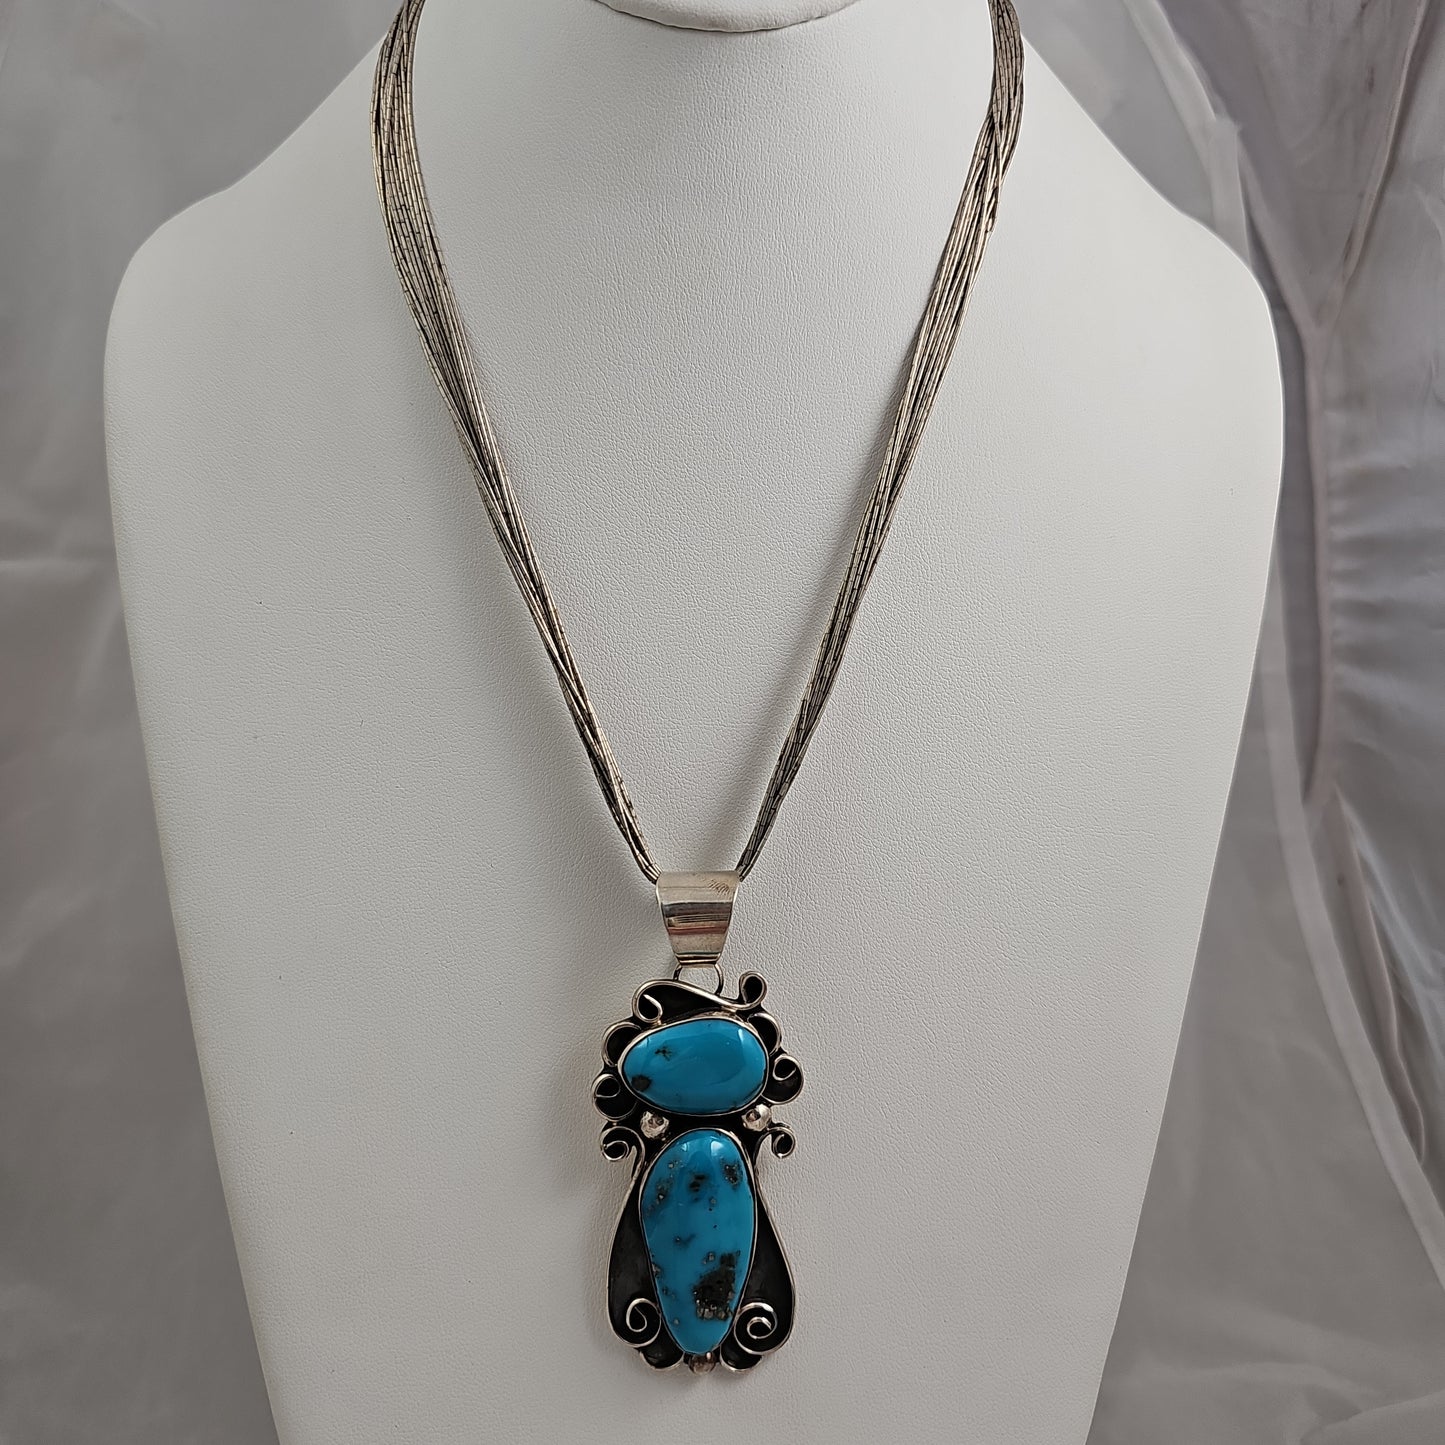 Chimney Butte turquoise scroll pendant on liquid silver chain.